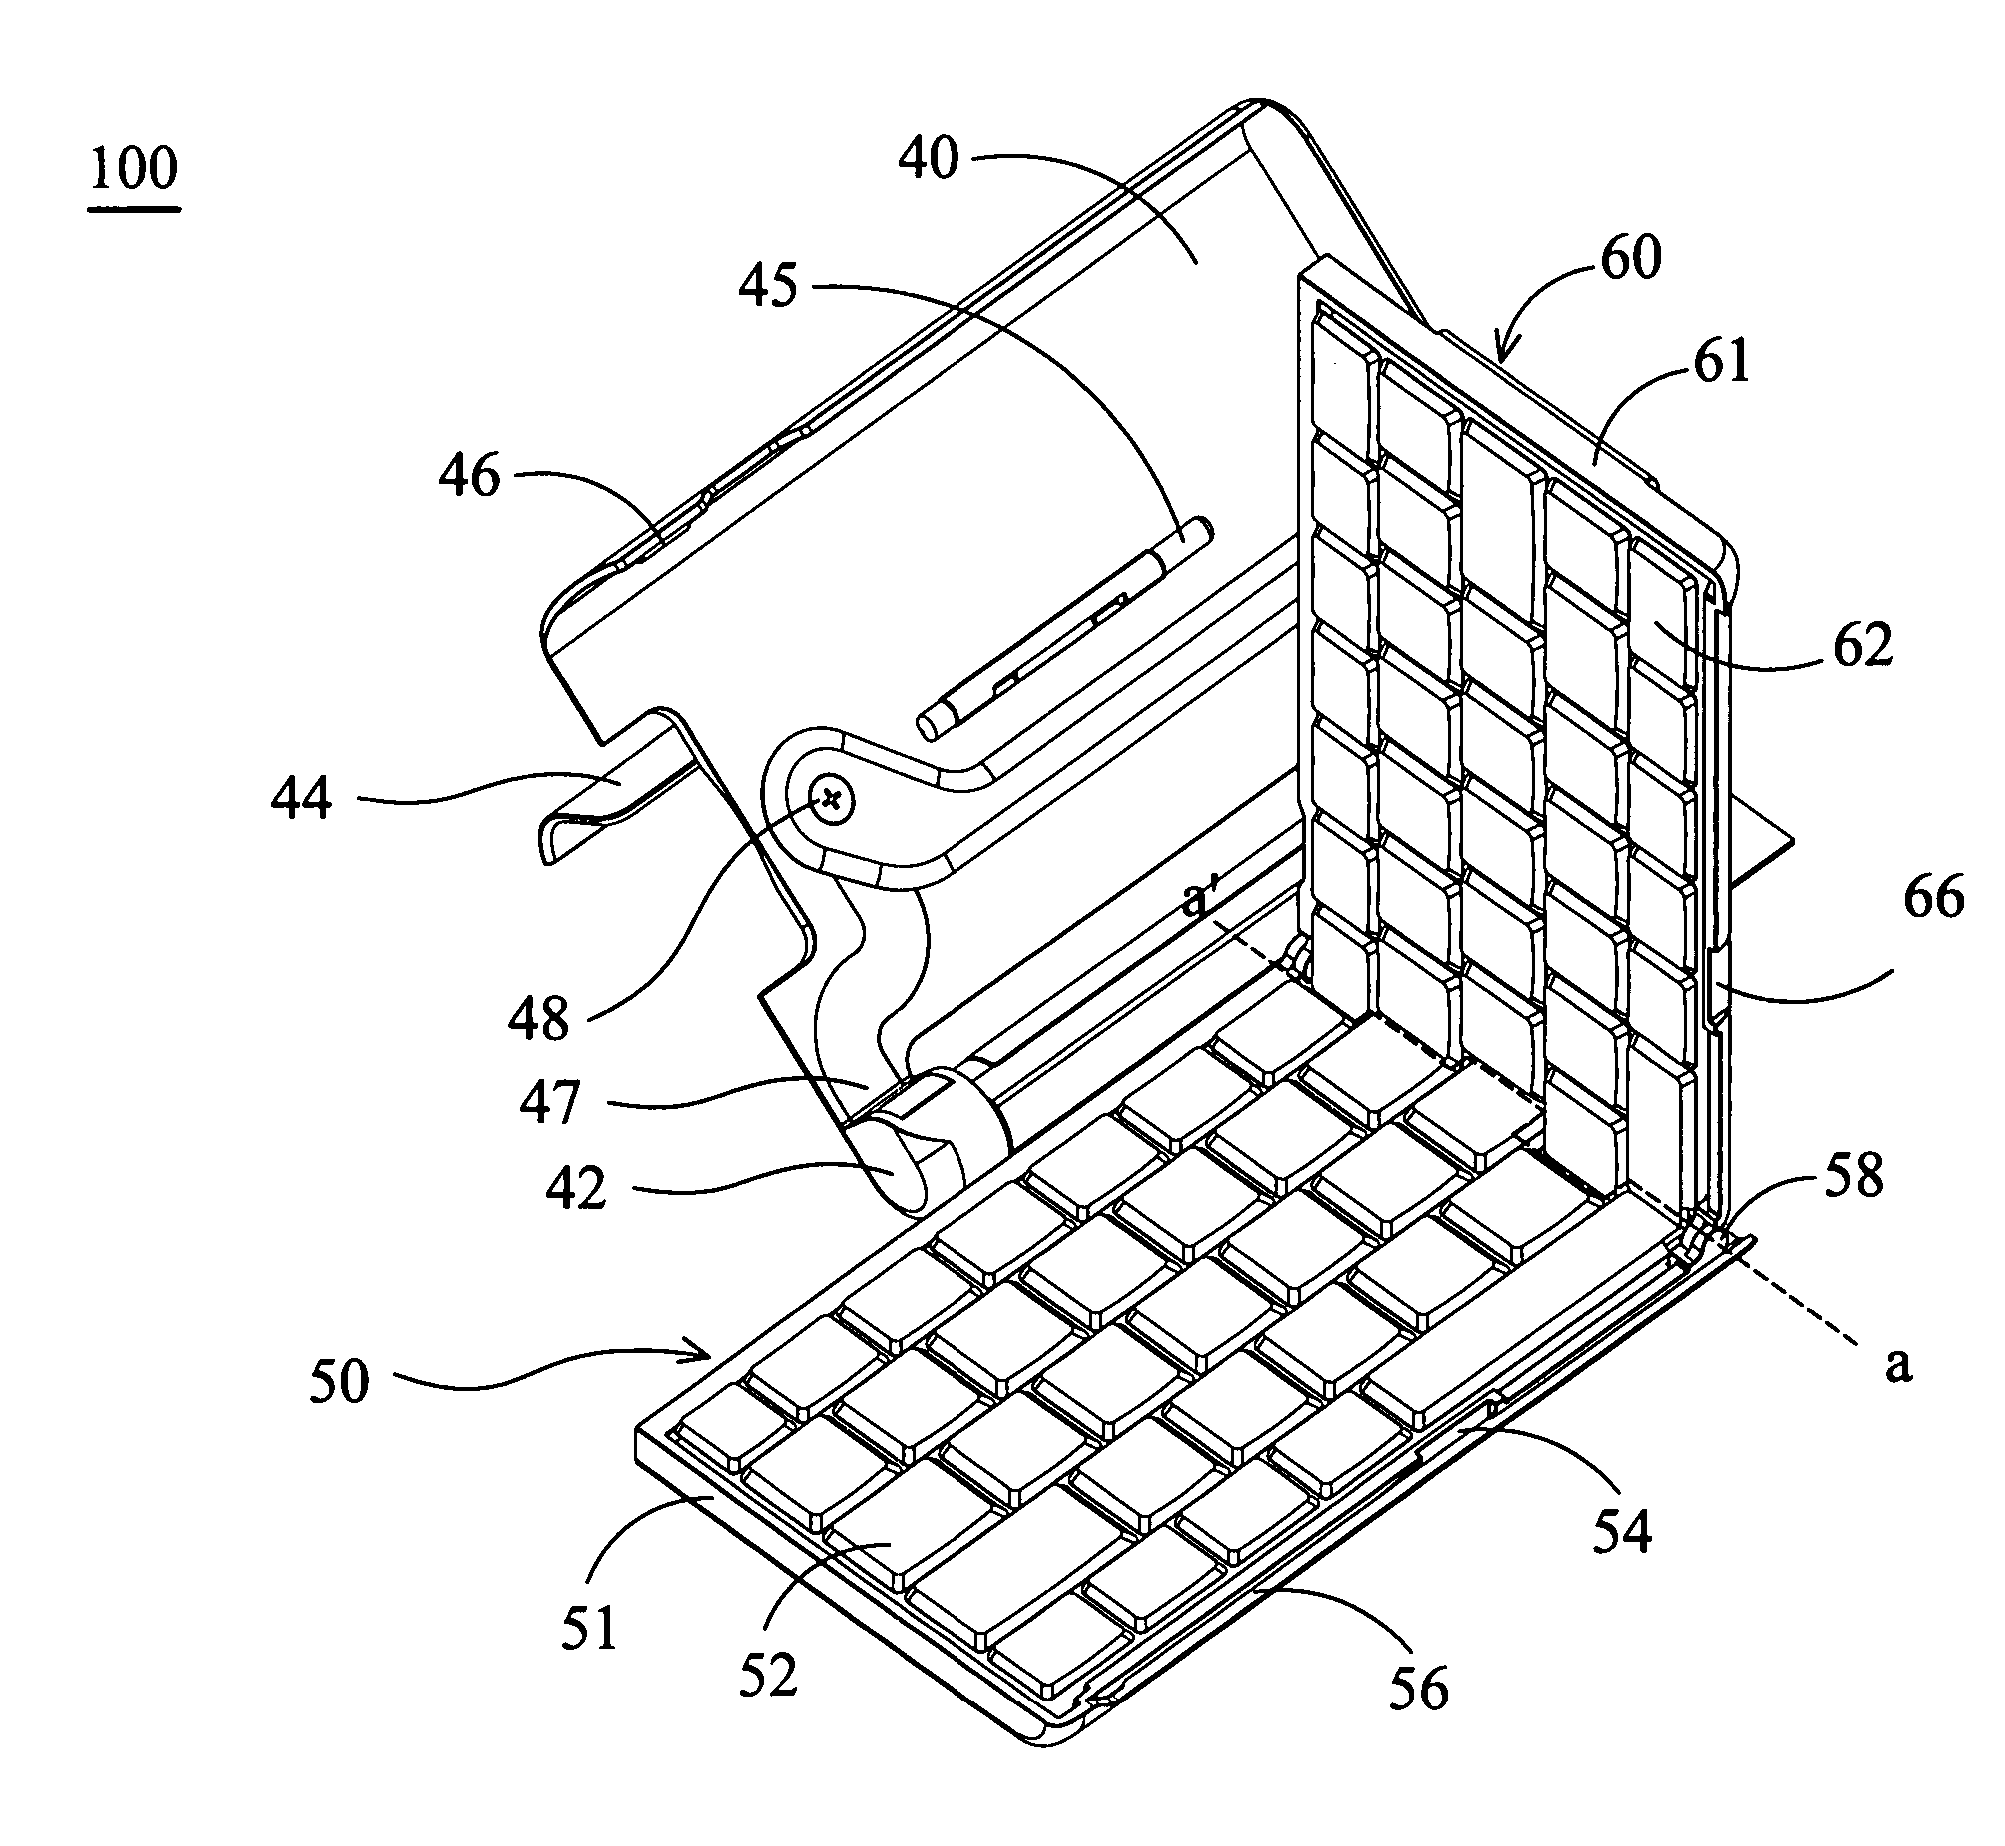 Collapsible keyboard